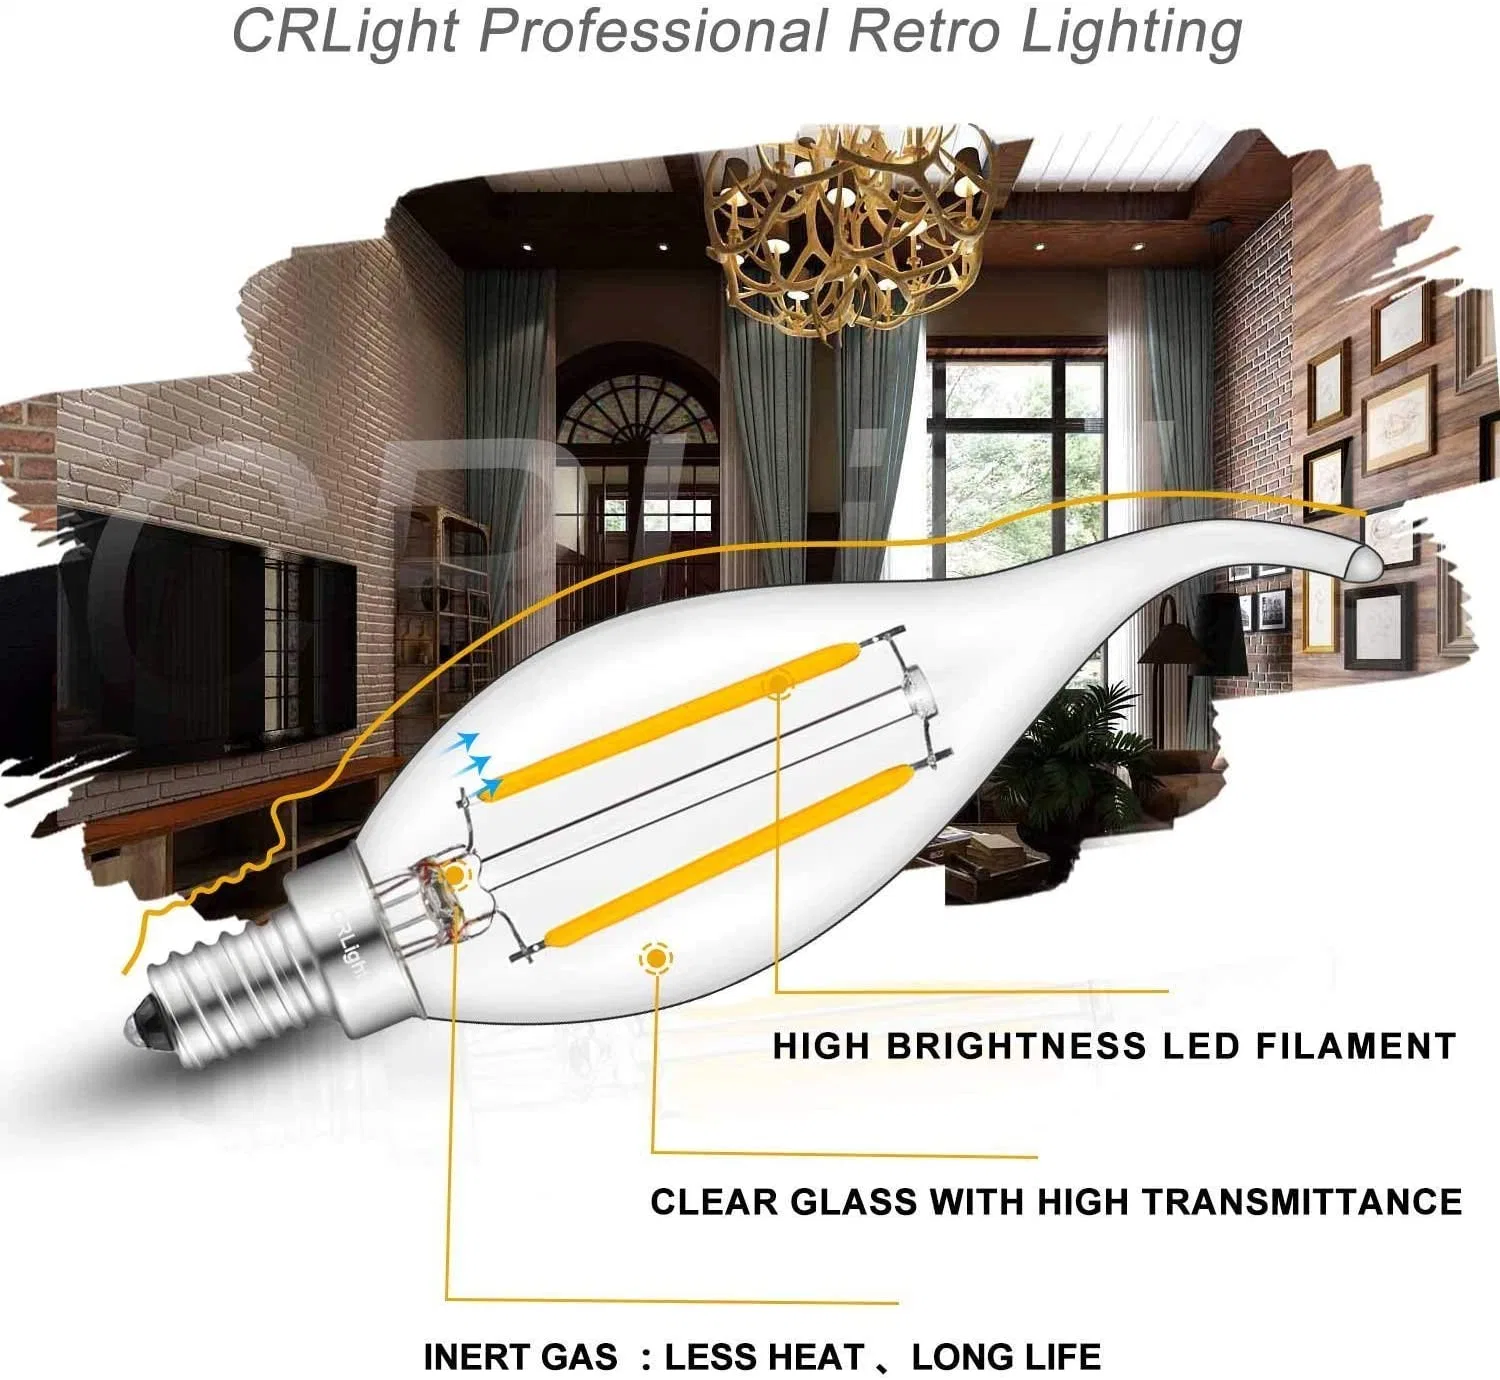 Hot Selling LED Bulb Candle 4W (40W Equivalent) 480lm 2200-6500K E14/E27 360degree LED Filament Bulb Lamp with CE Approved